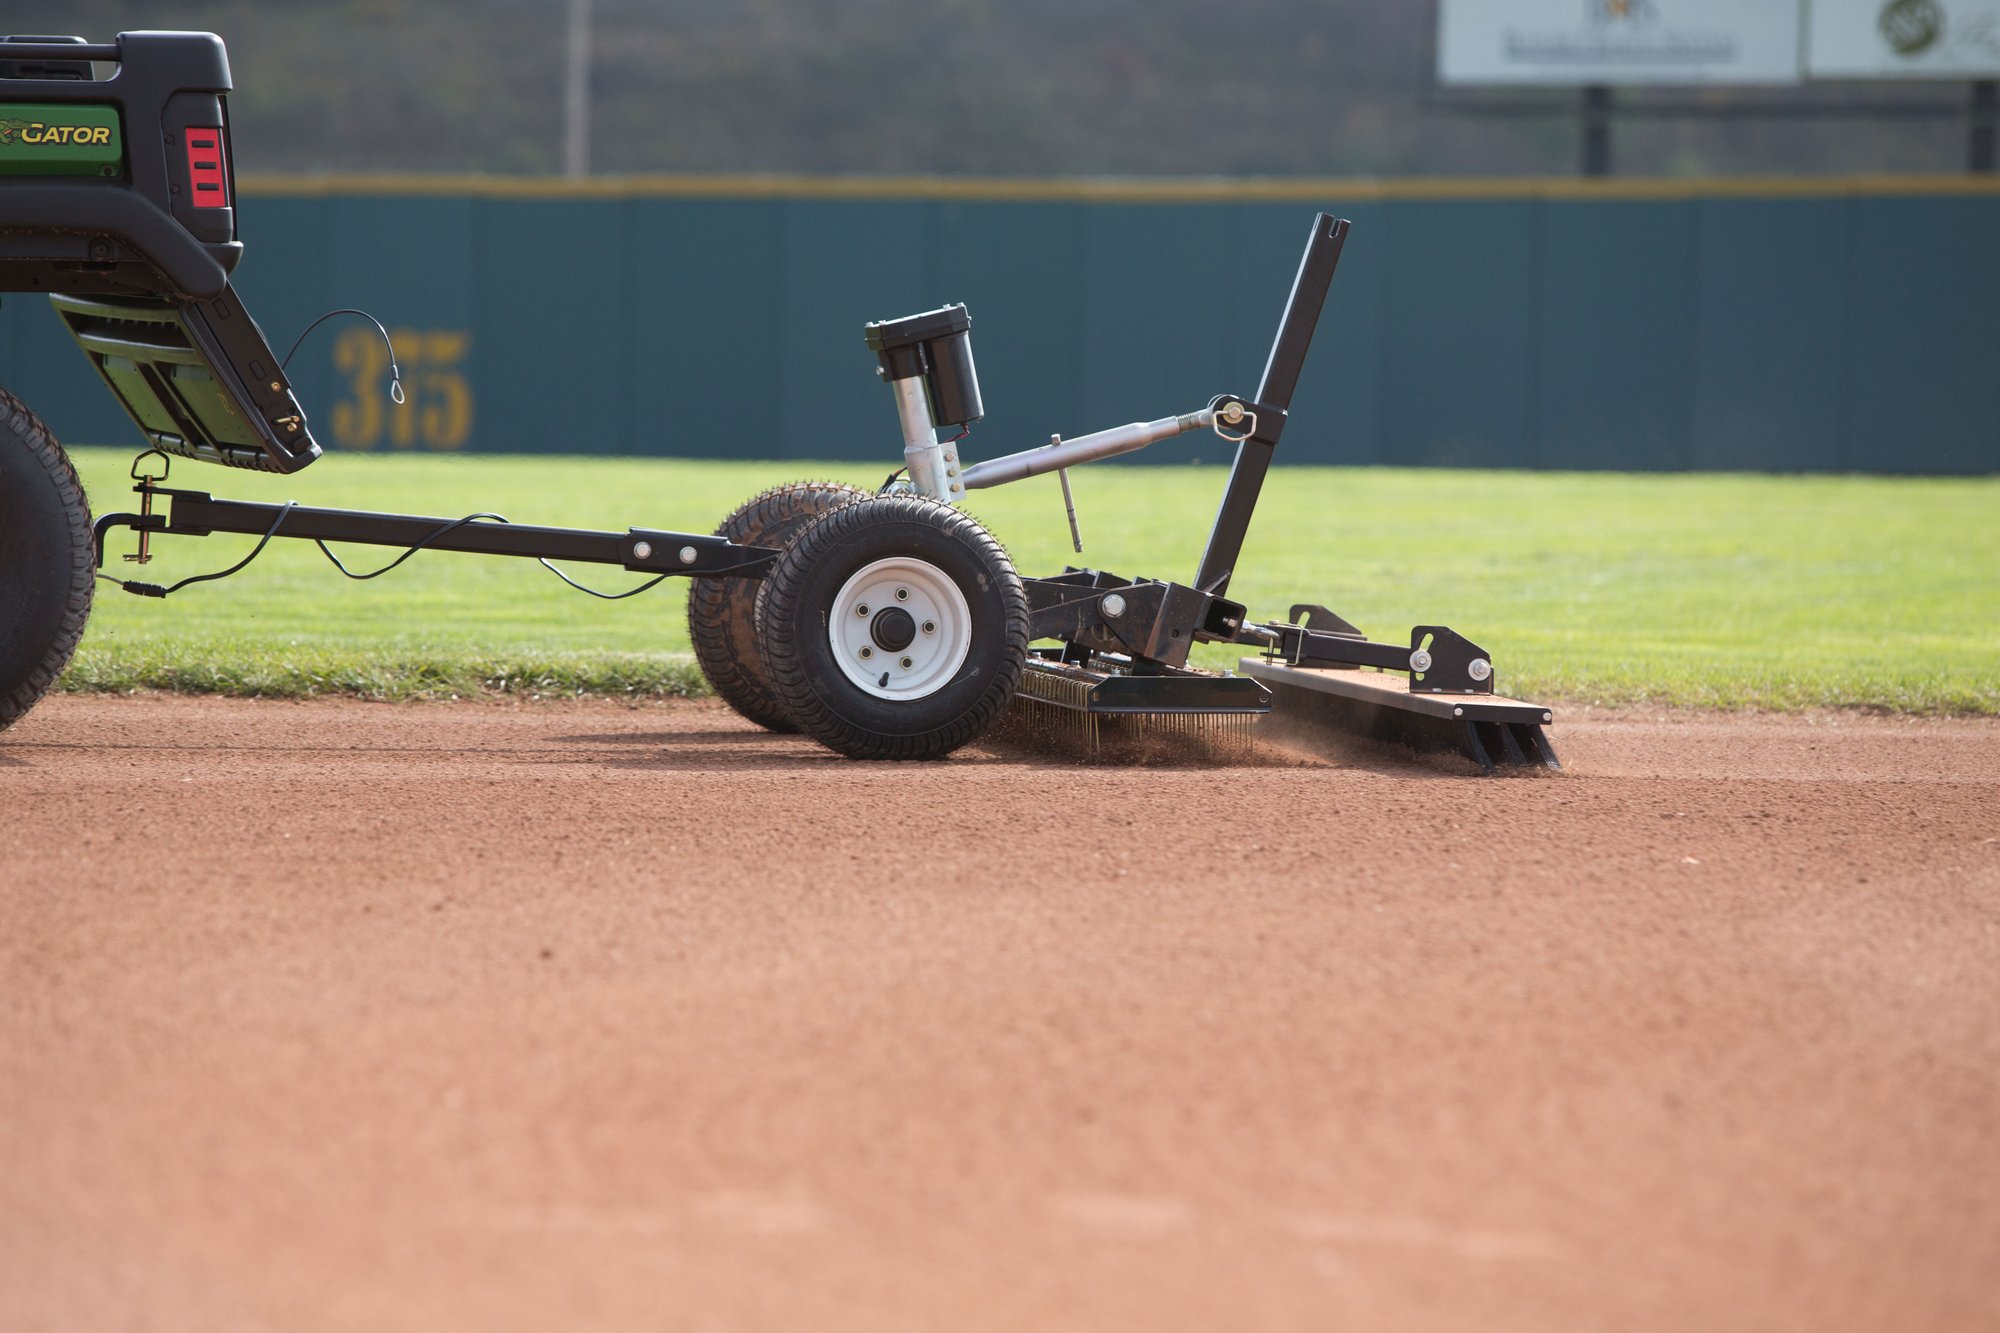 Force rascal pro with fine finish broom grooming infield